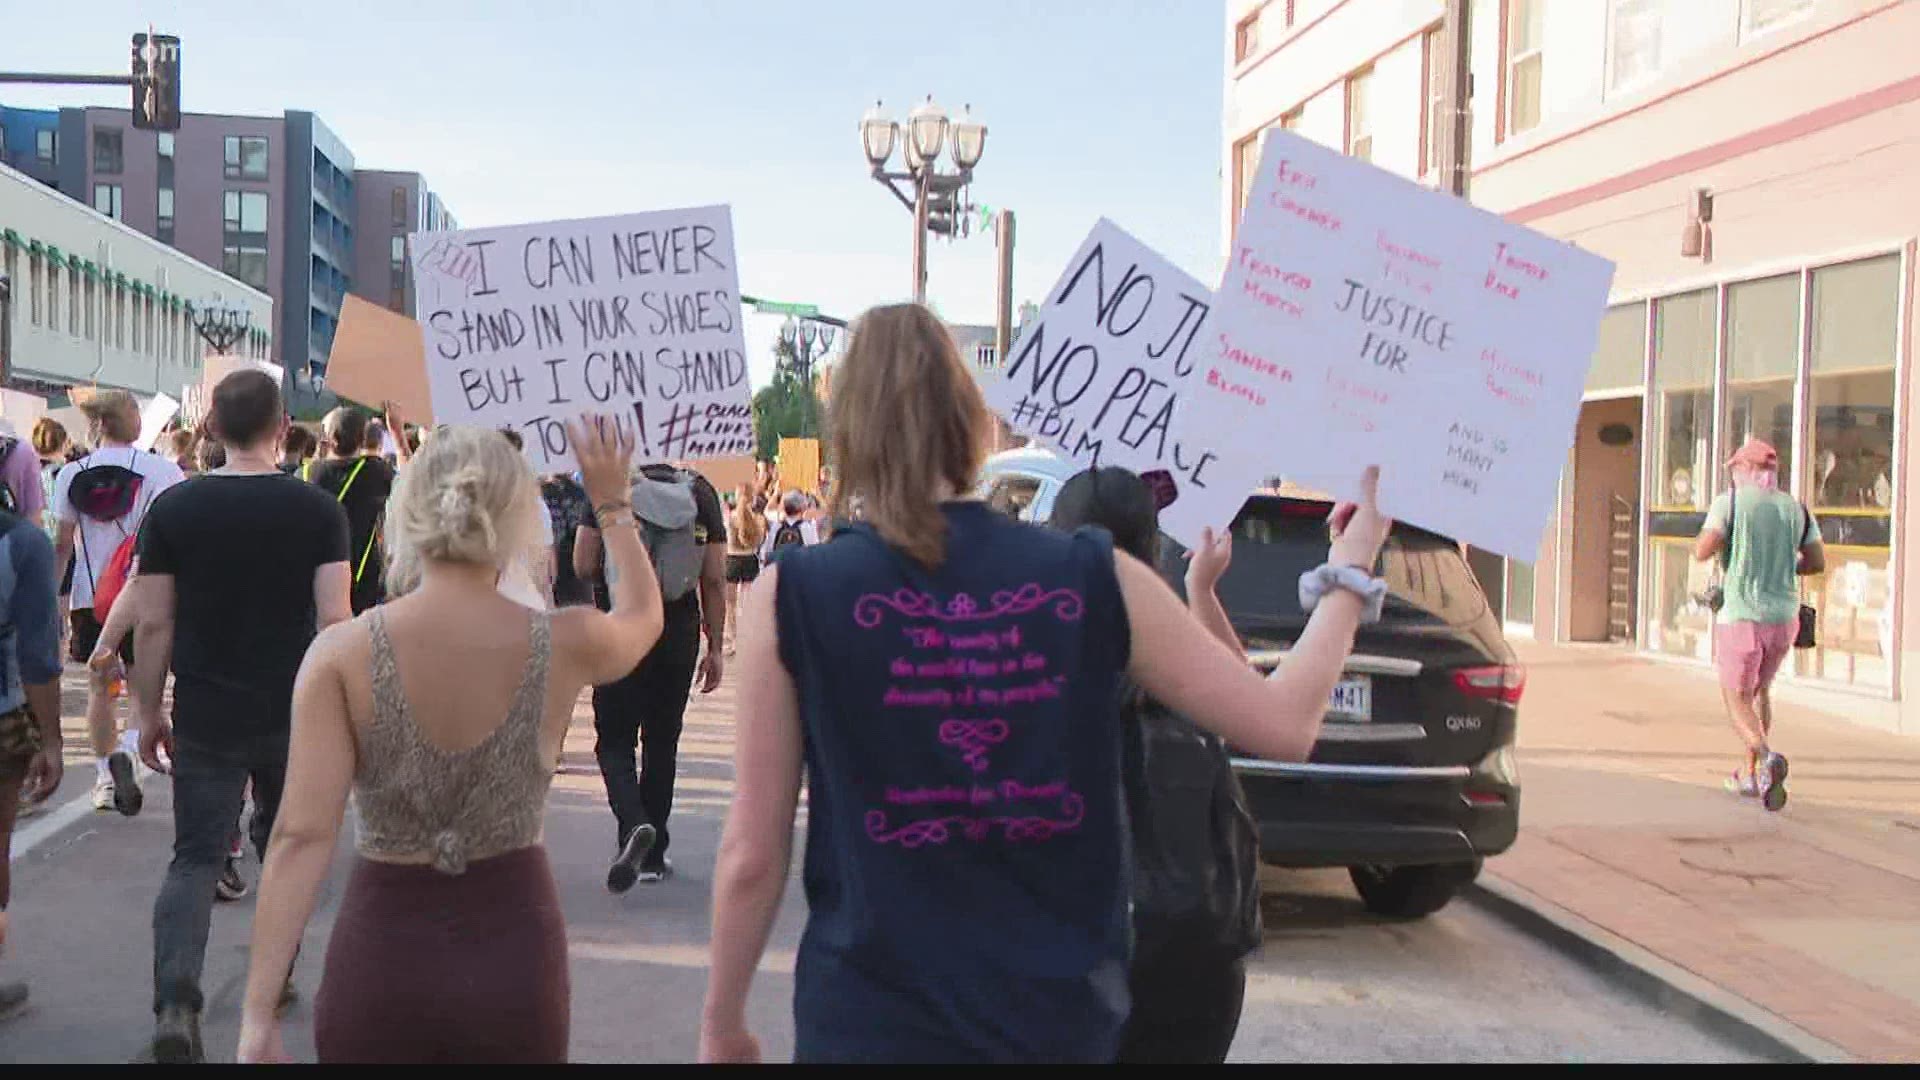 Protests are continuing to take place around the St. Louis area after the death of George Floyd.